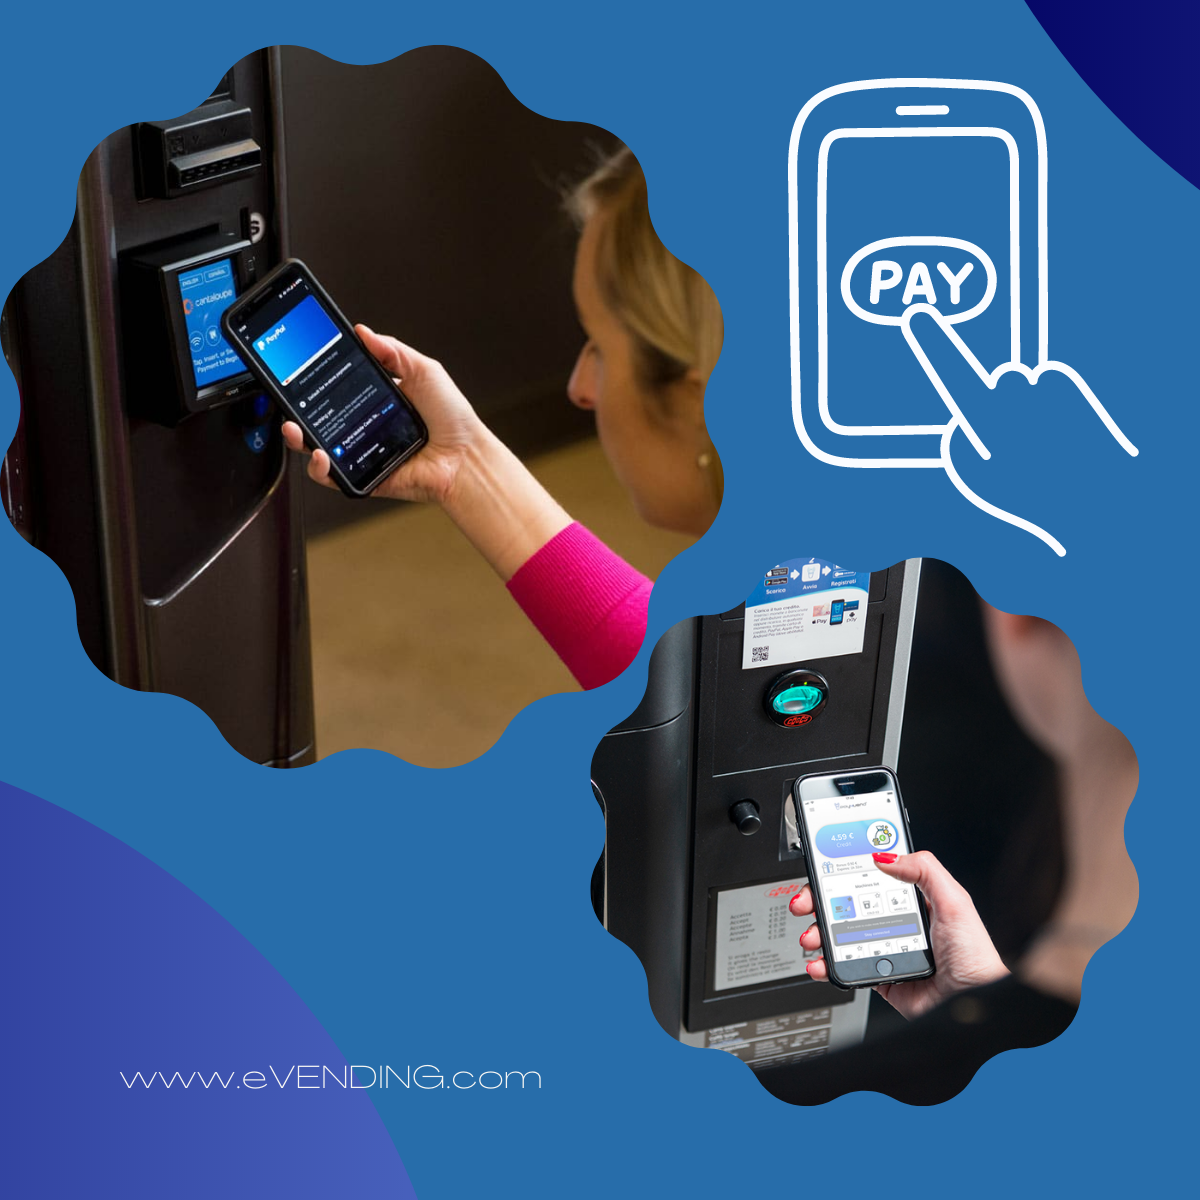 MOBILE PAYMENT OPTIONS INCREASE VENDING MACHINE SALES